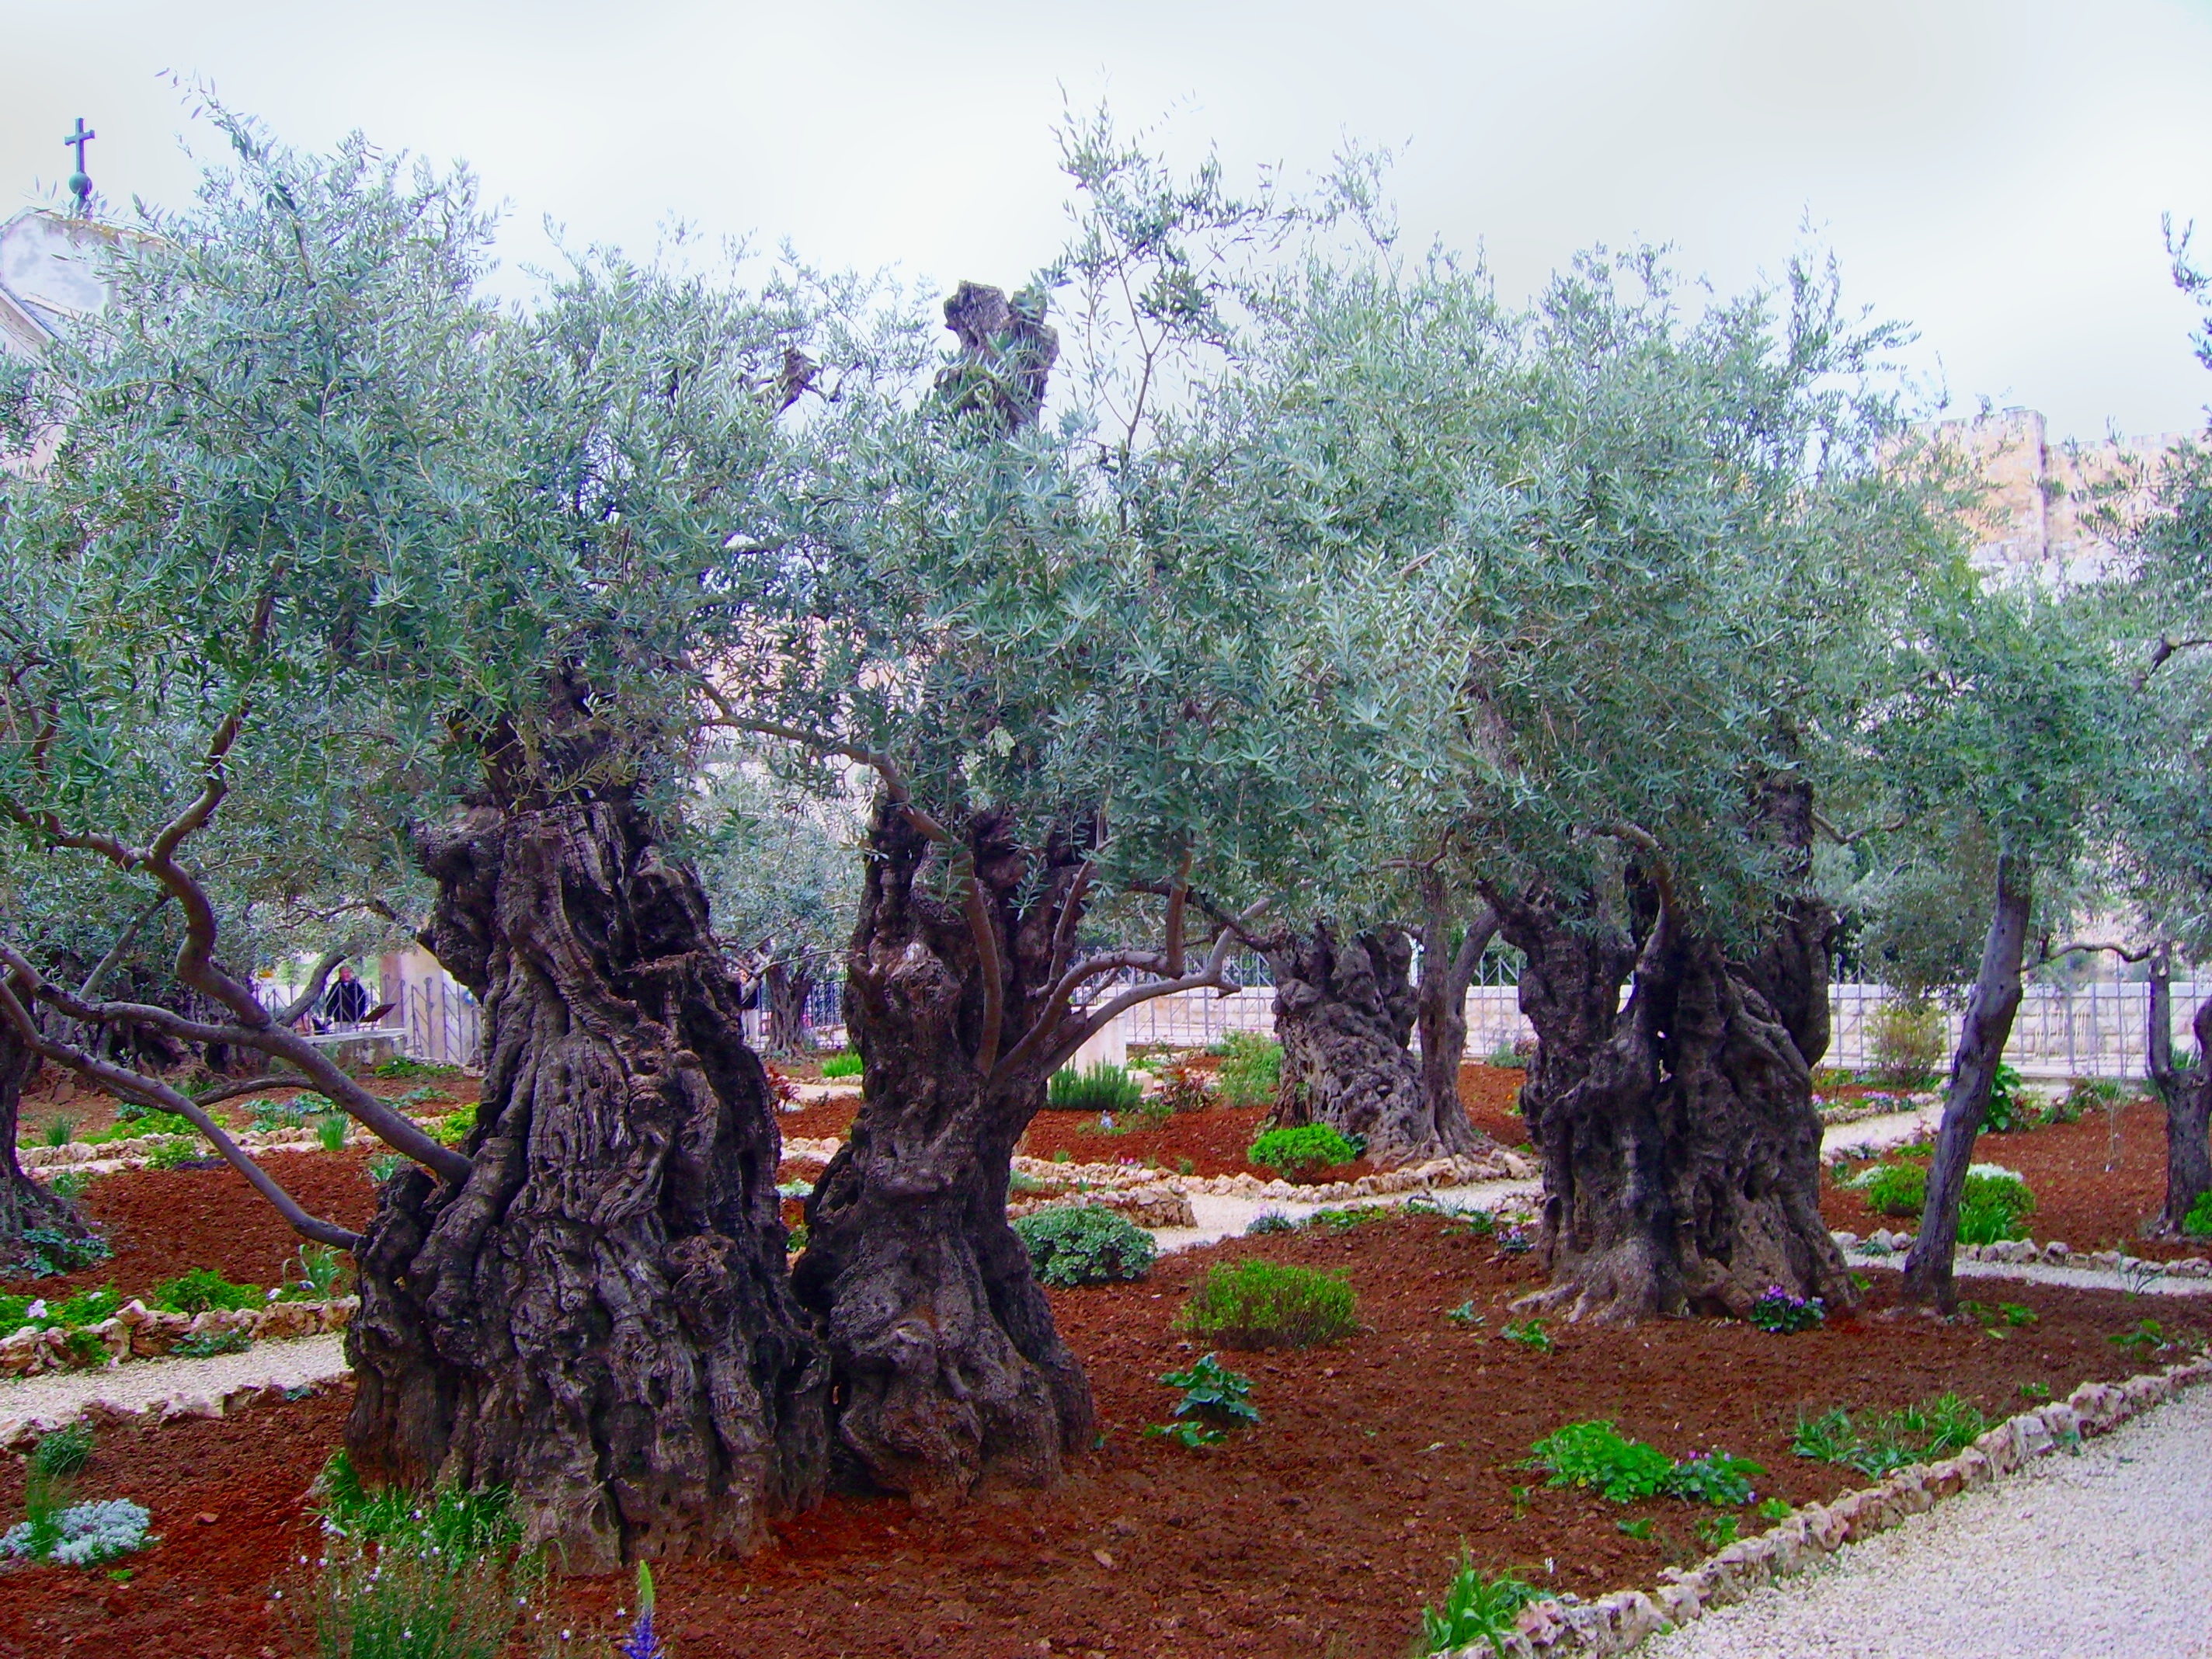 Ancient Olive Trees